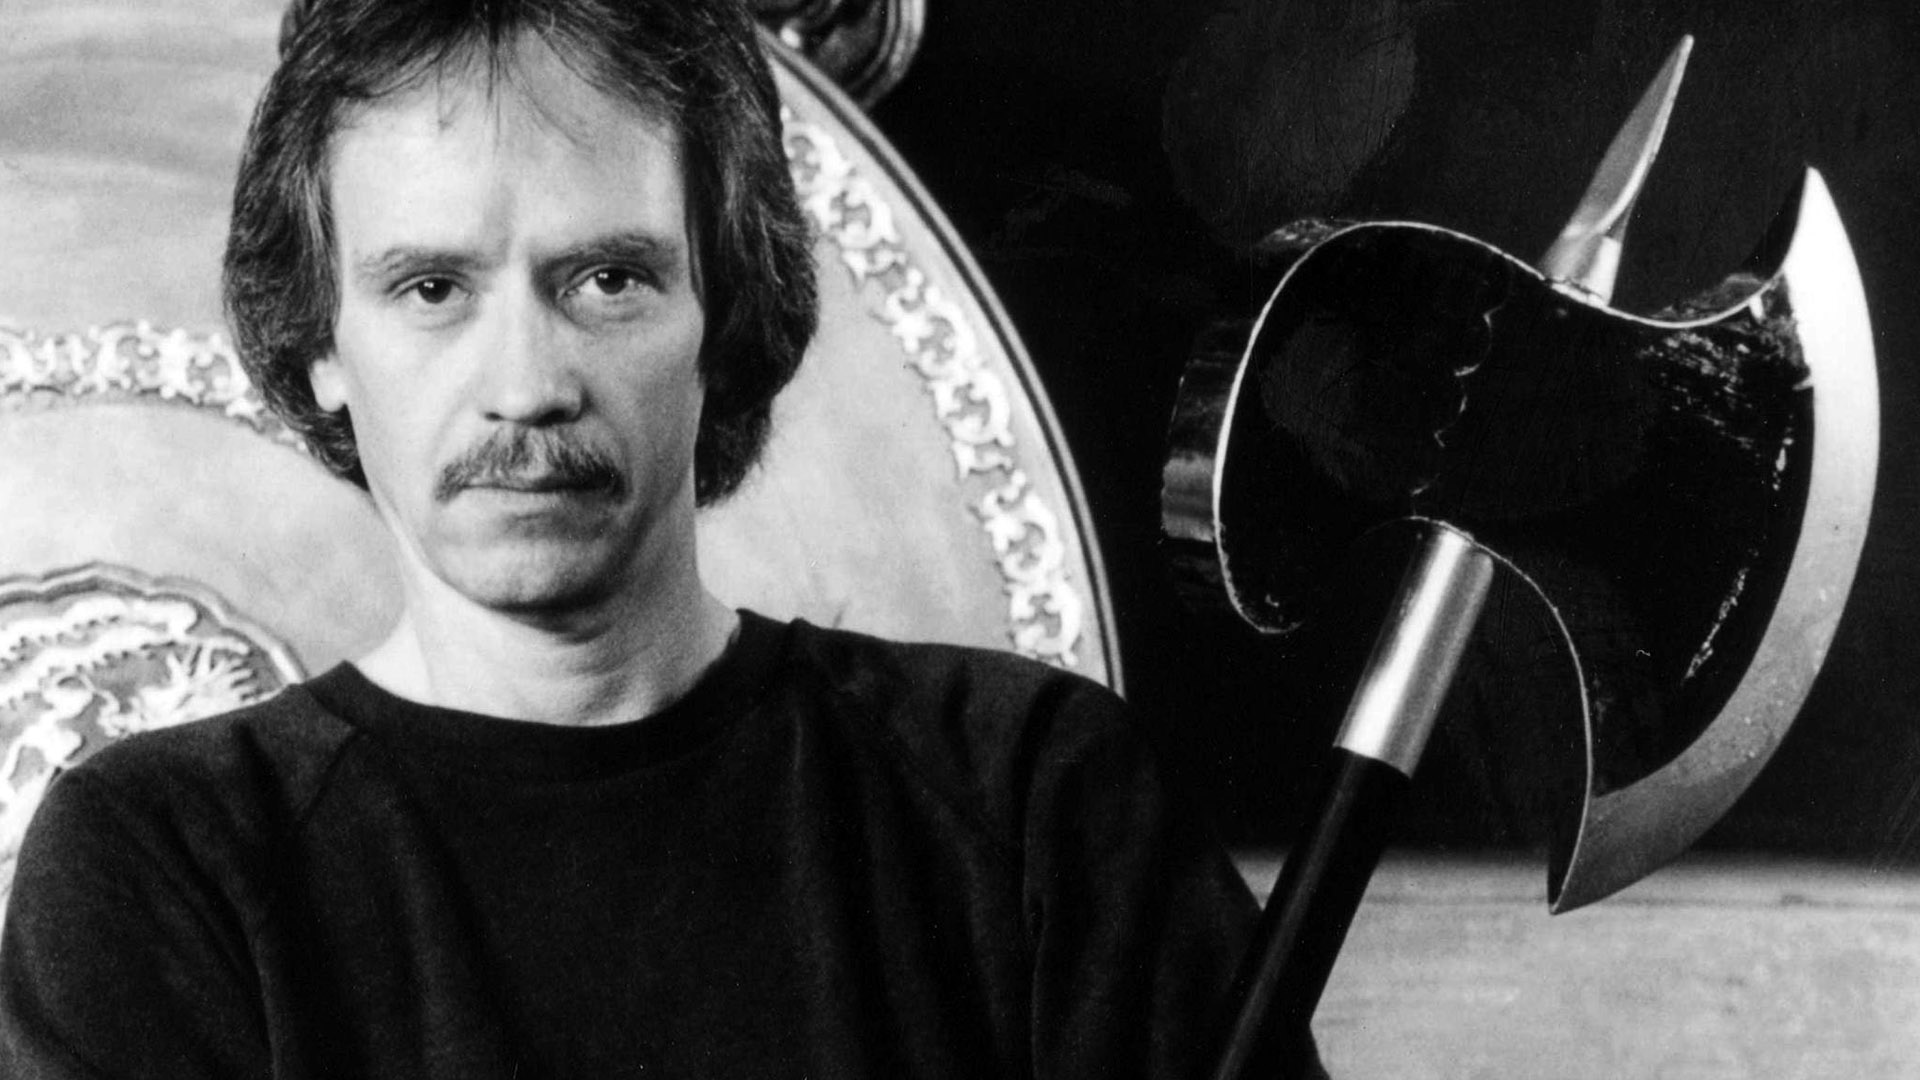 John Carpenter: 'Could I succeed if I started today? No. I'd be